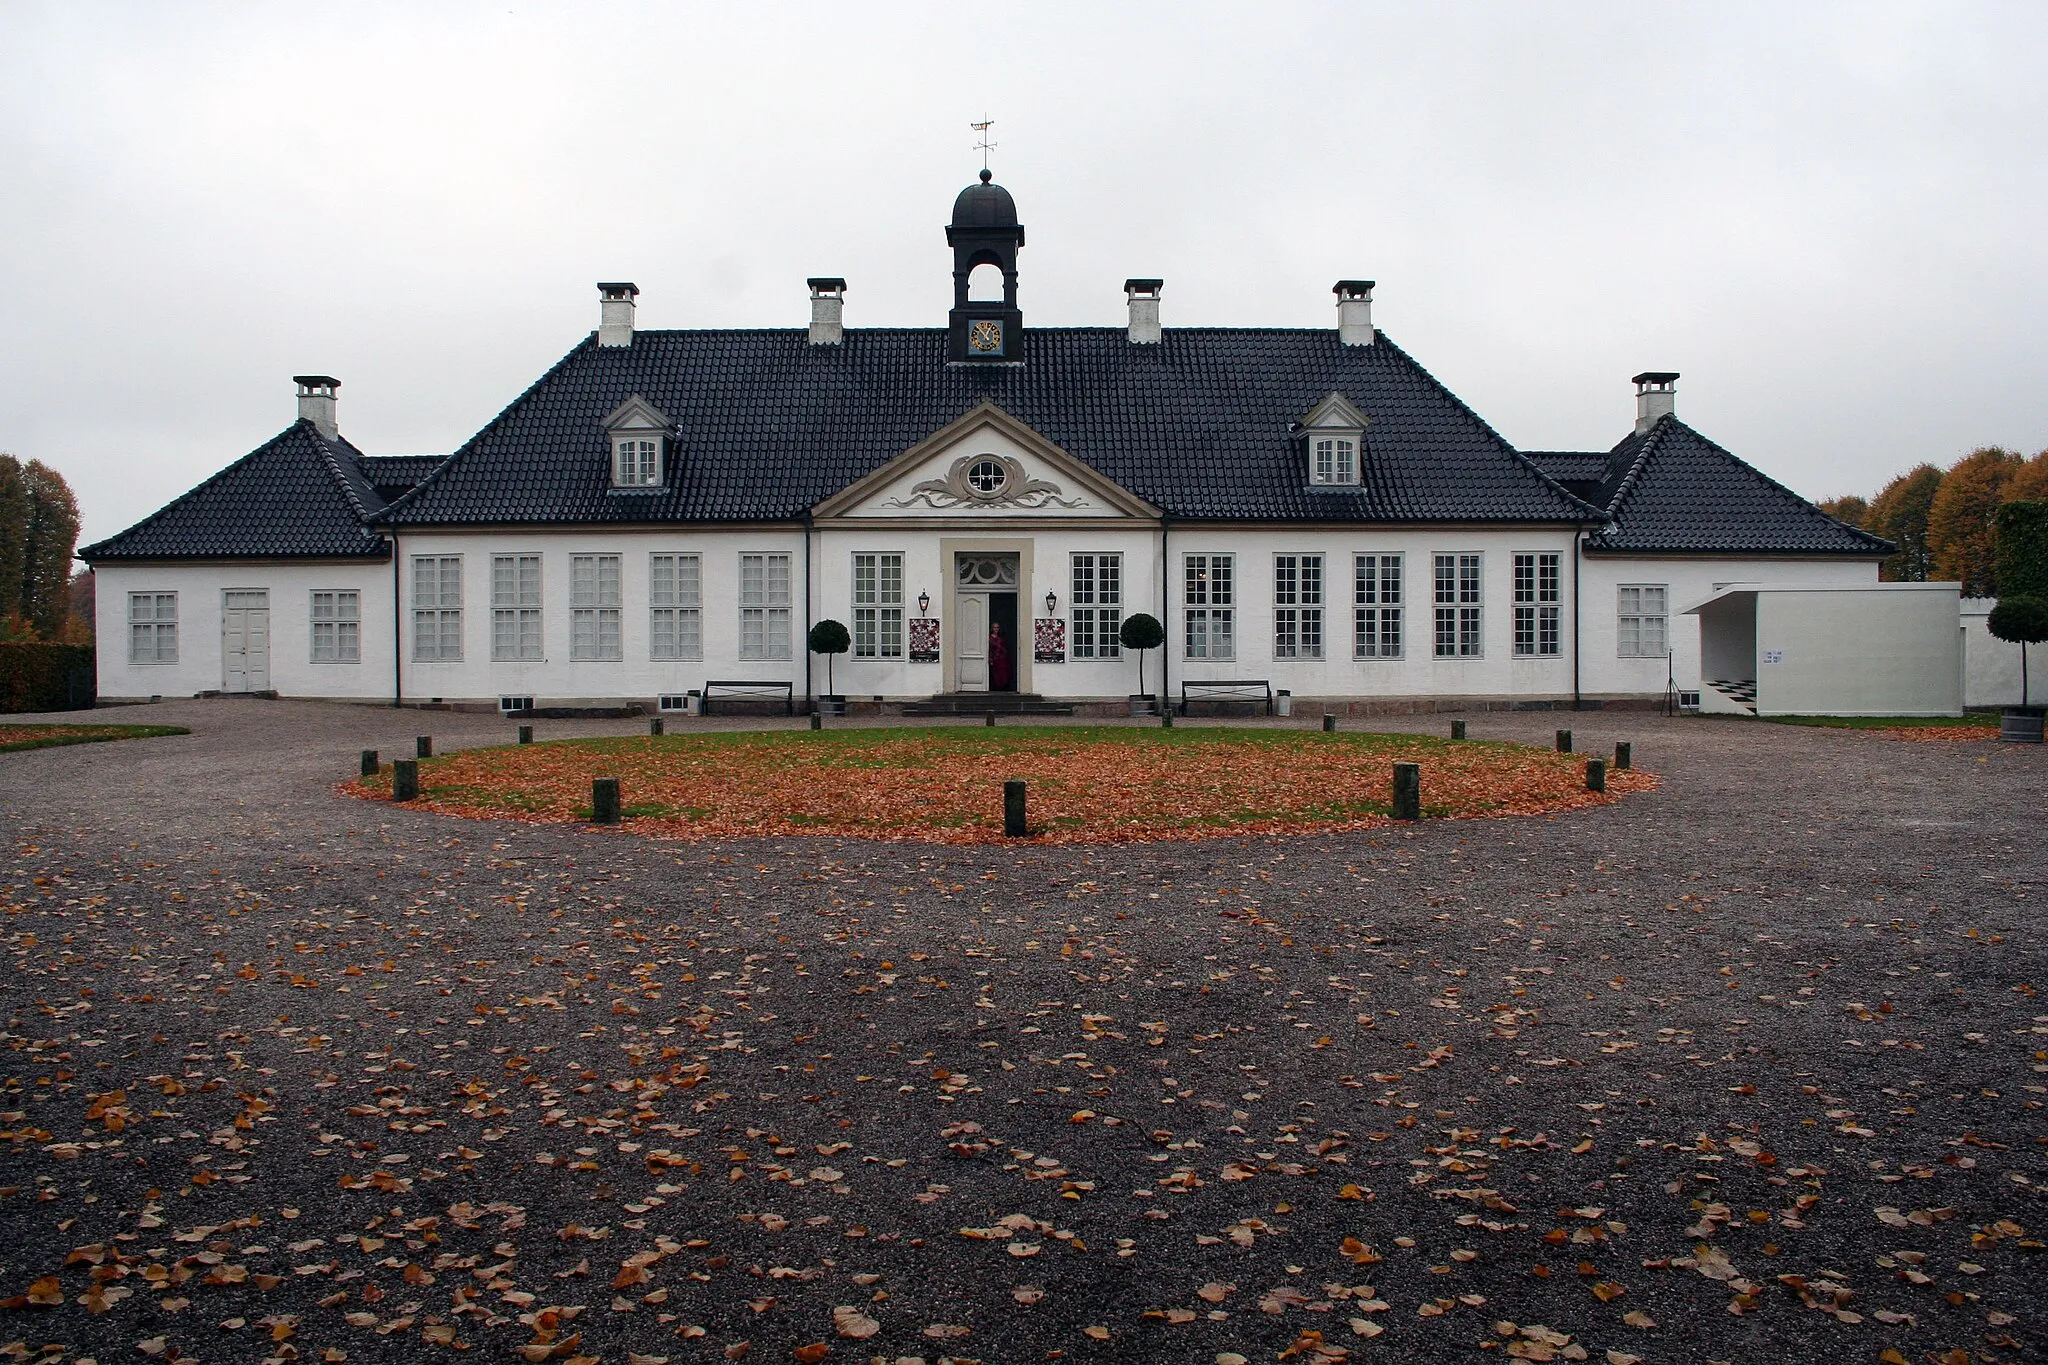 Photo showing: The picture shown the main building of Gammel Holtegaard.
At that time Gl. Holtegaard had an exhibition on Escher.

The little shelter in the right side is a part of the exhibition